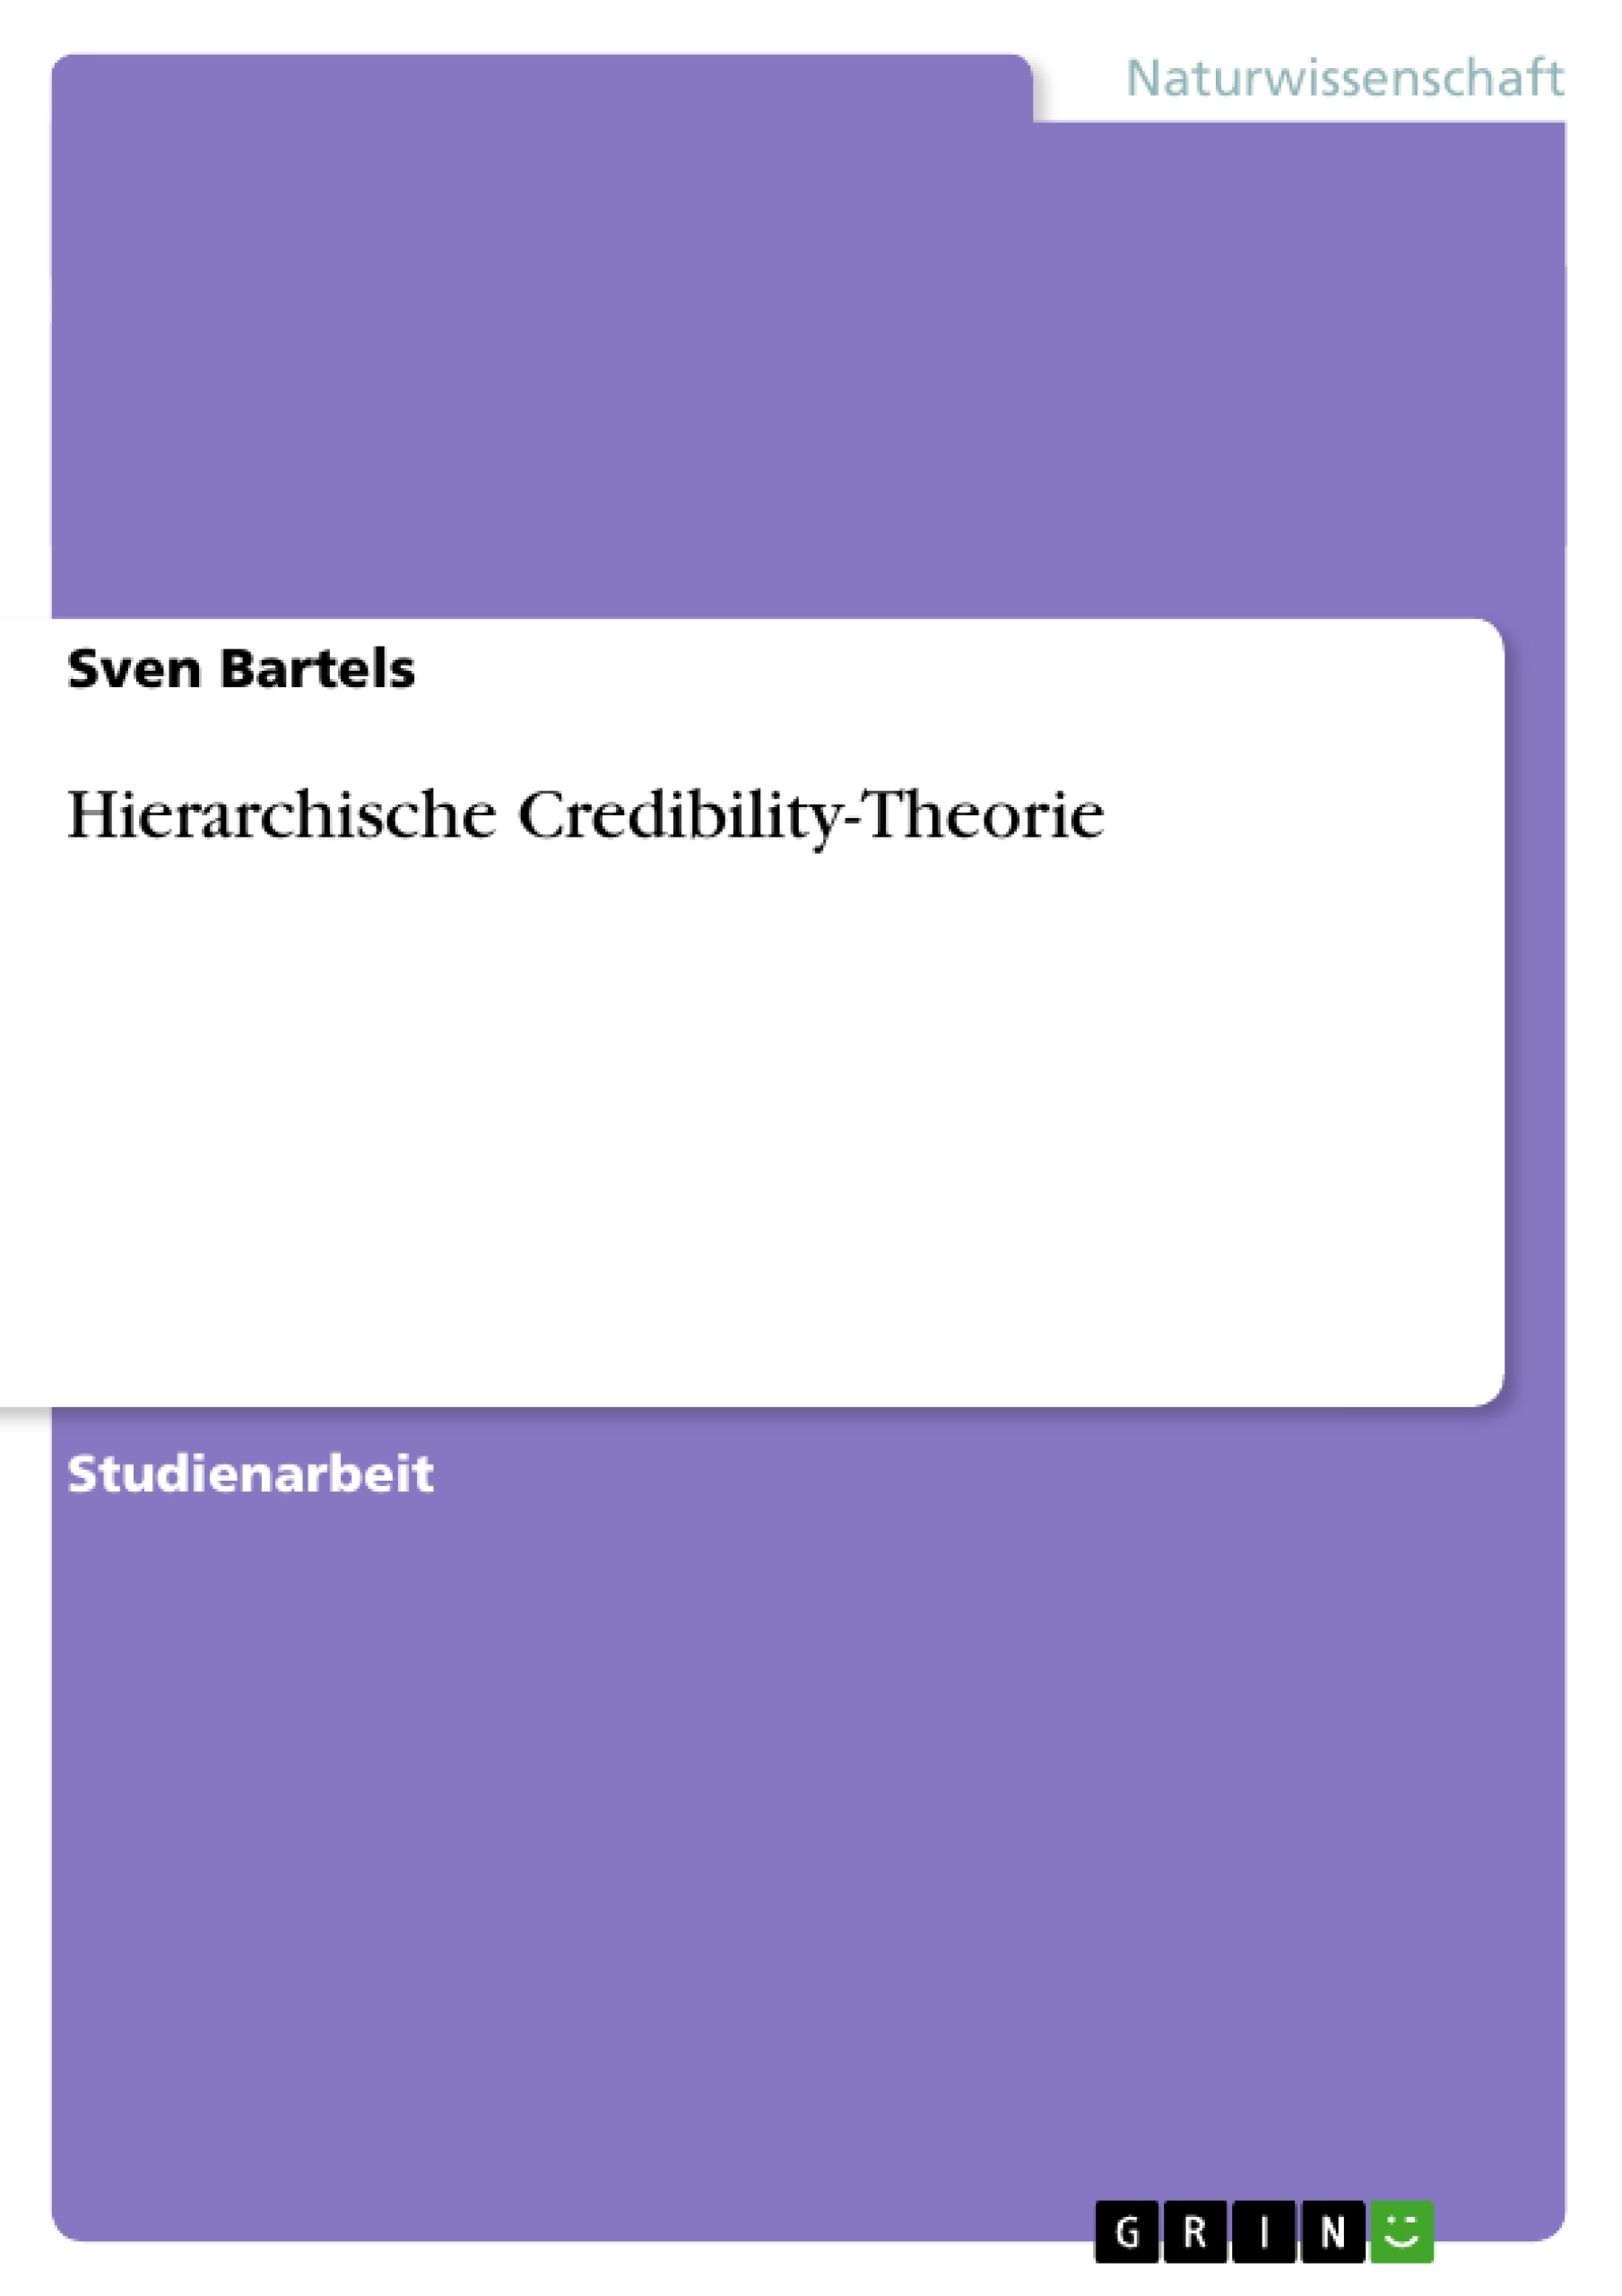 Título: Hierarchische Credibility-Theorie